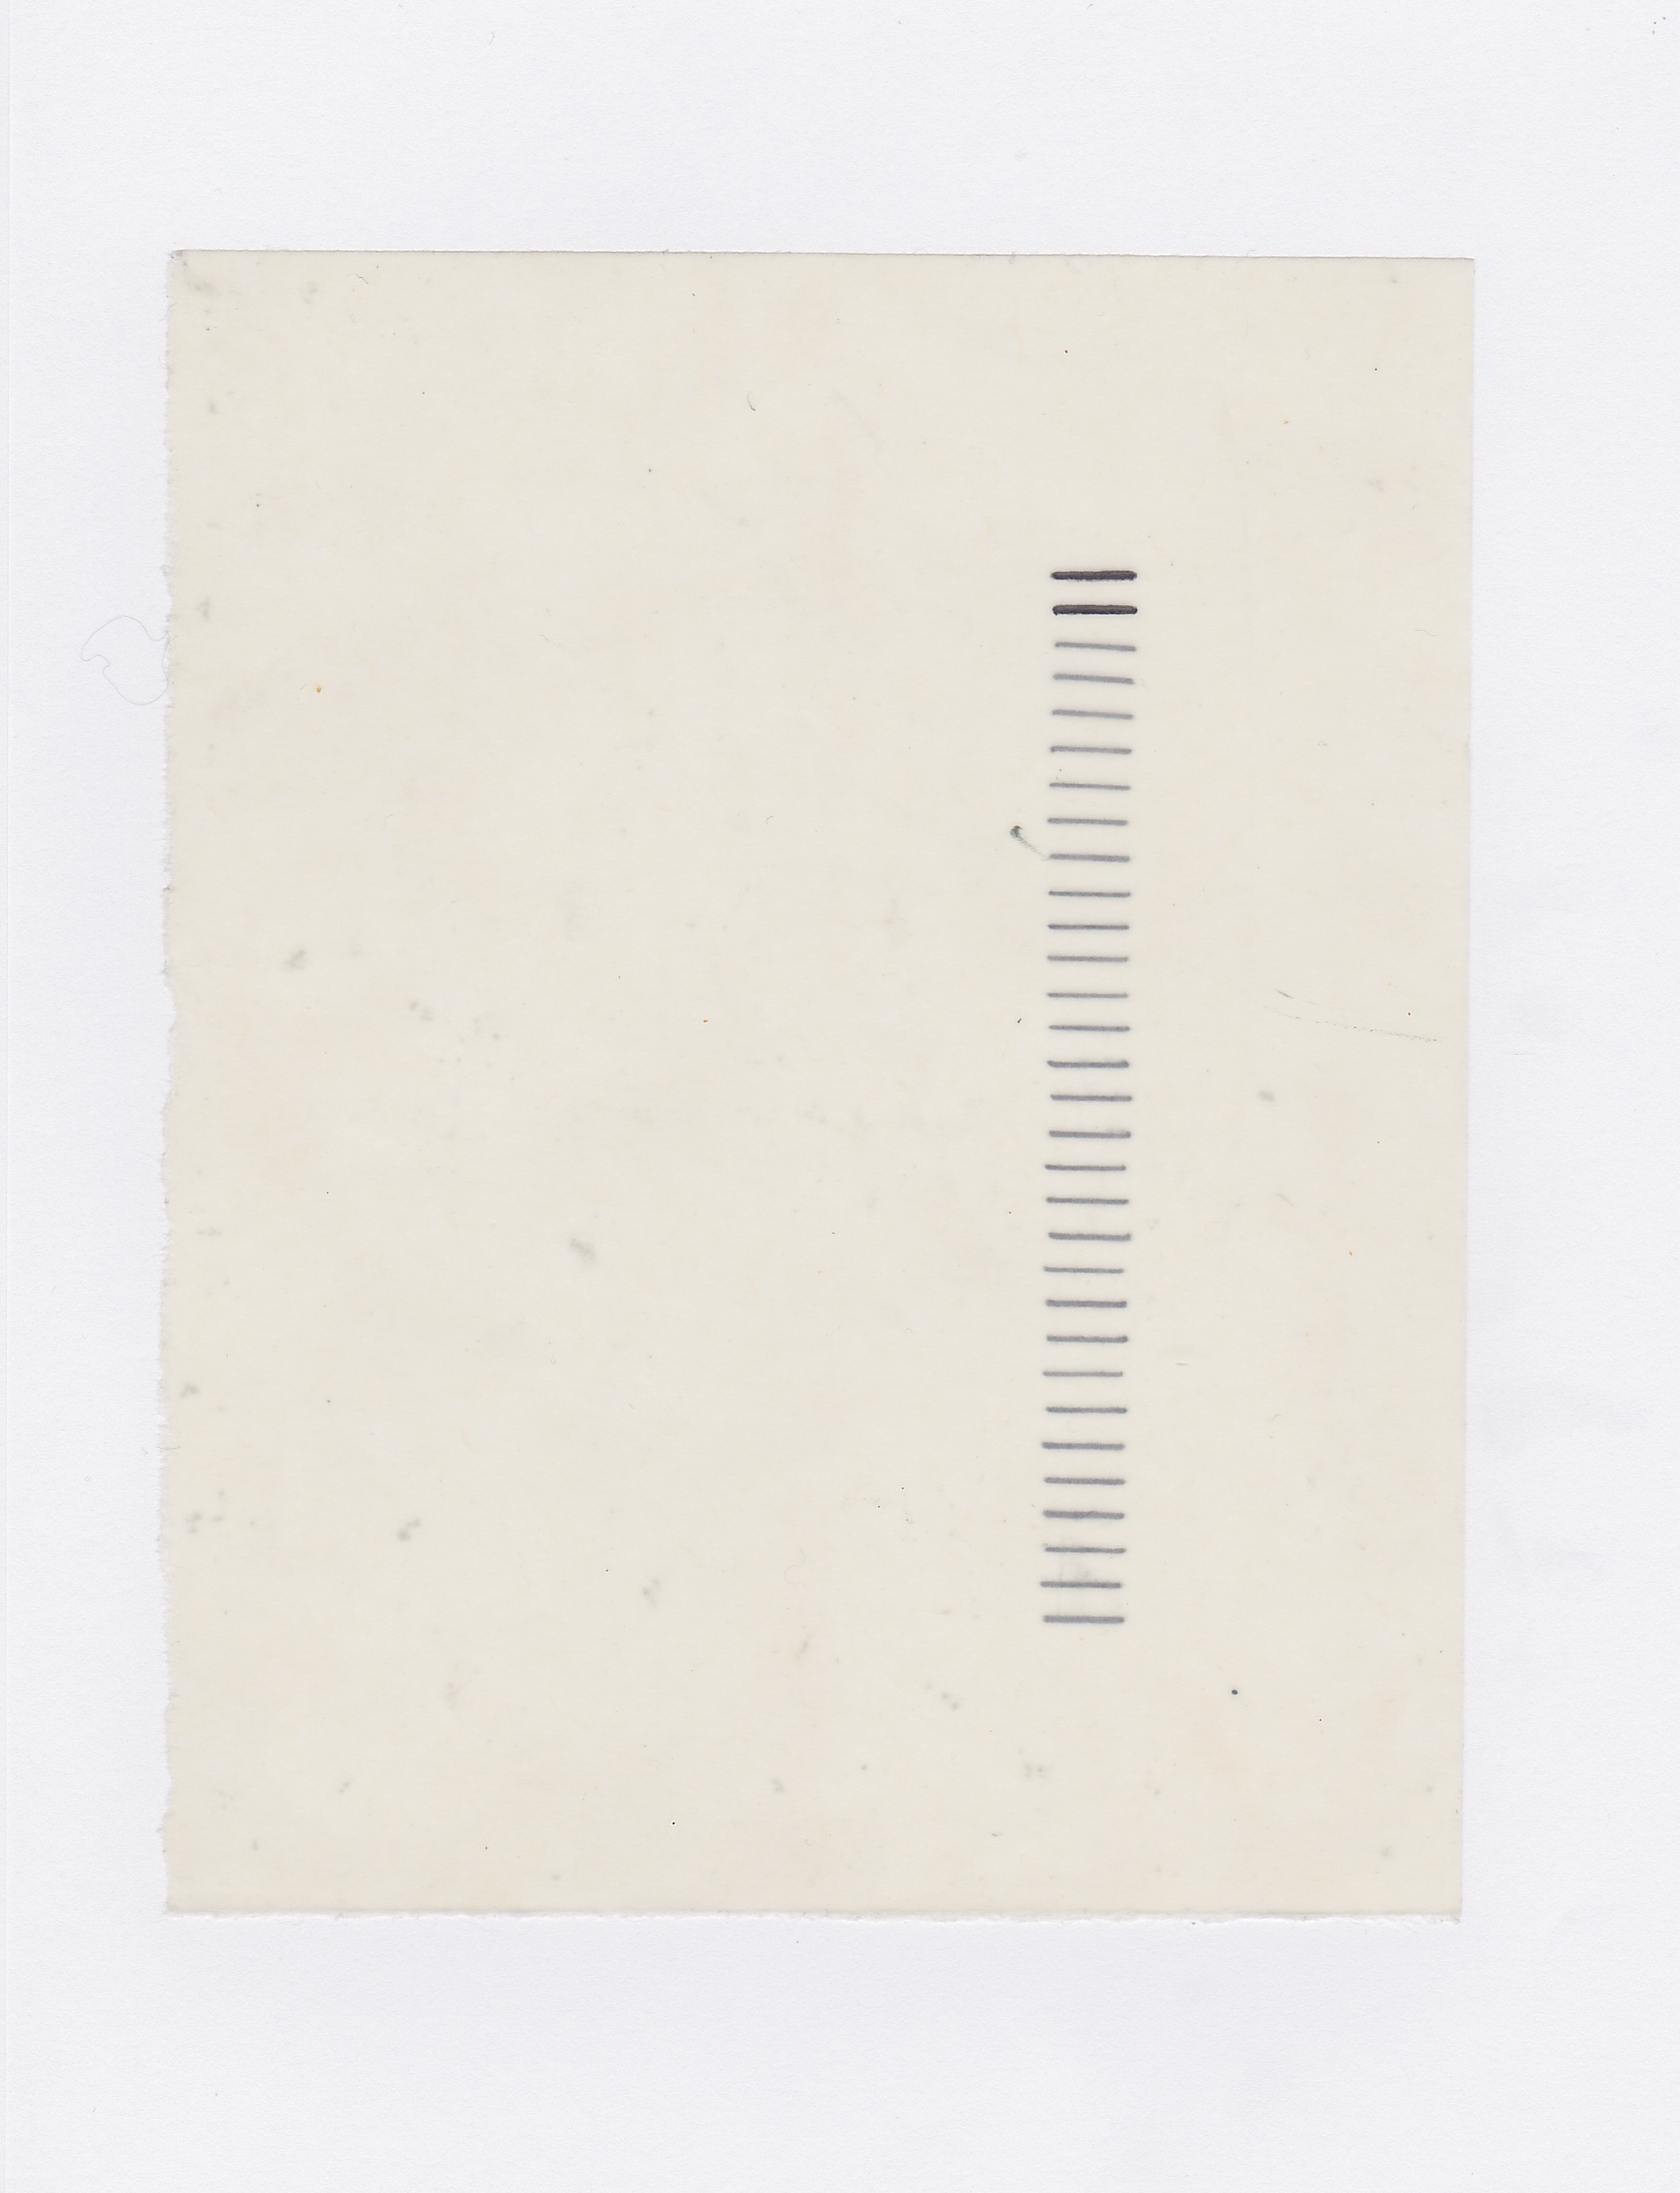 Untitled (the city, observations 16A)  Pencil on layered(x2) oiled fabriano paper.  140mm x 180mm  December 2013